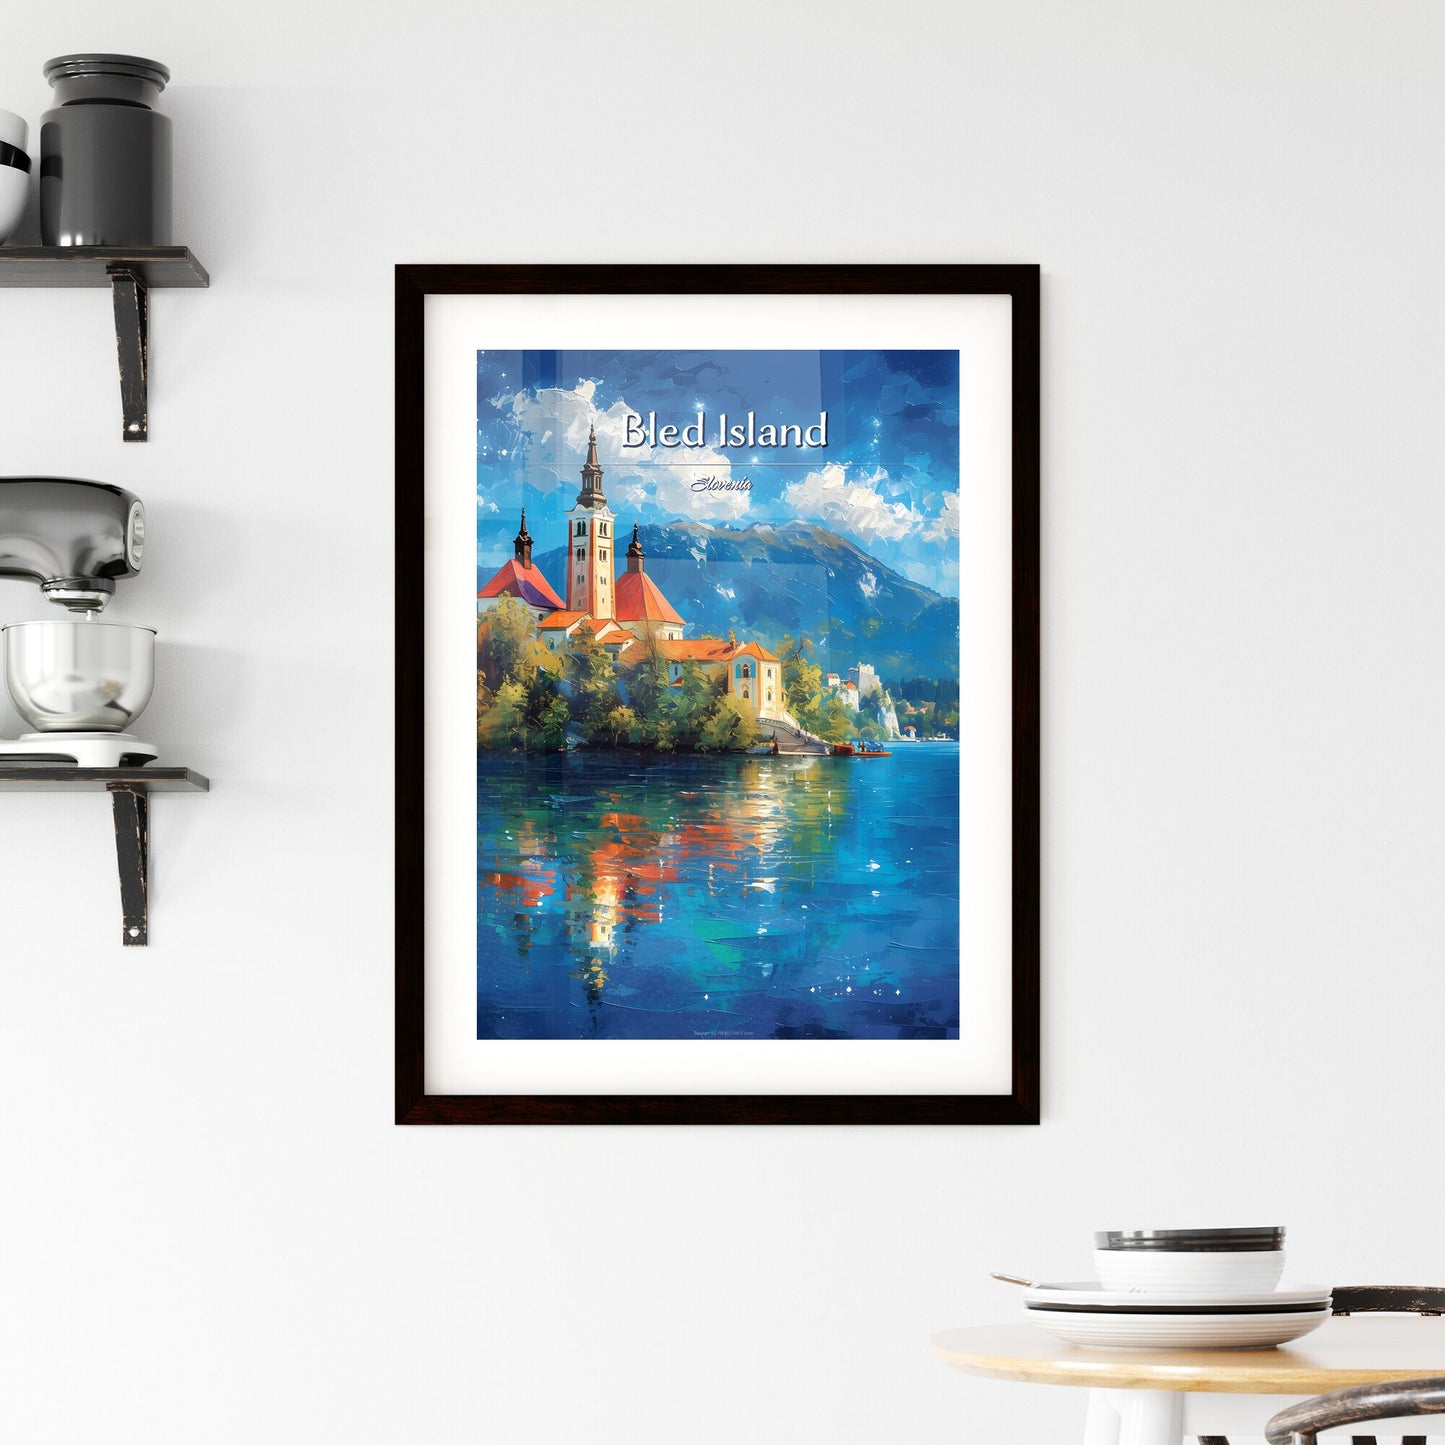 Bled Island, Slovenia - Art print of a building on a island with trees and mountains in the background Default Title